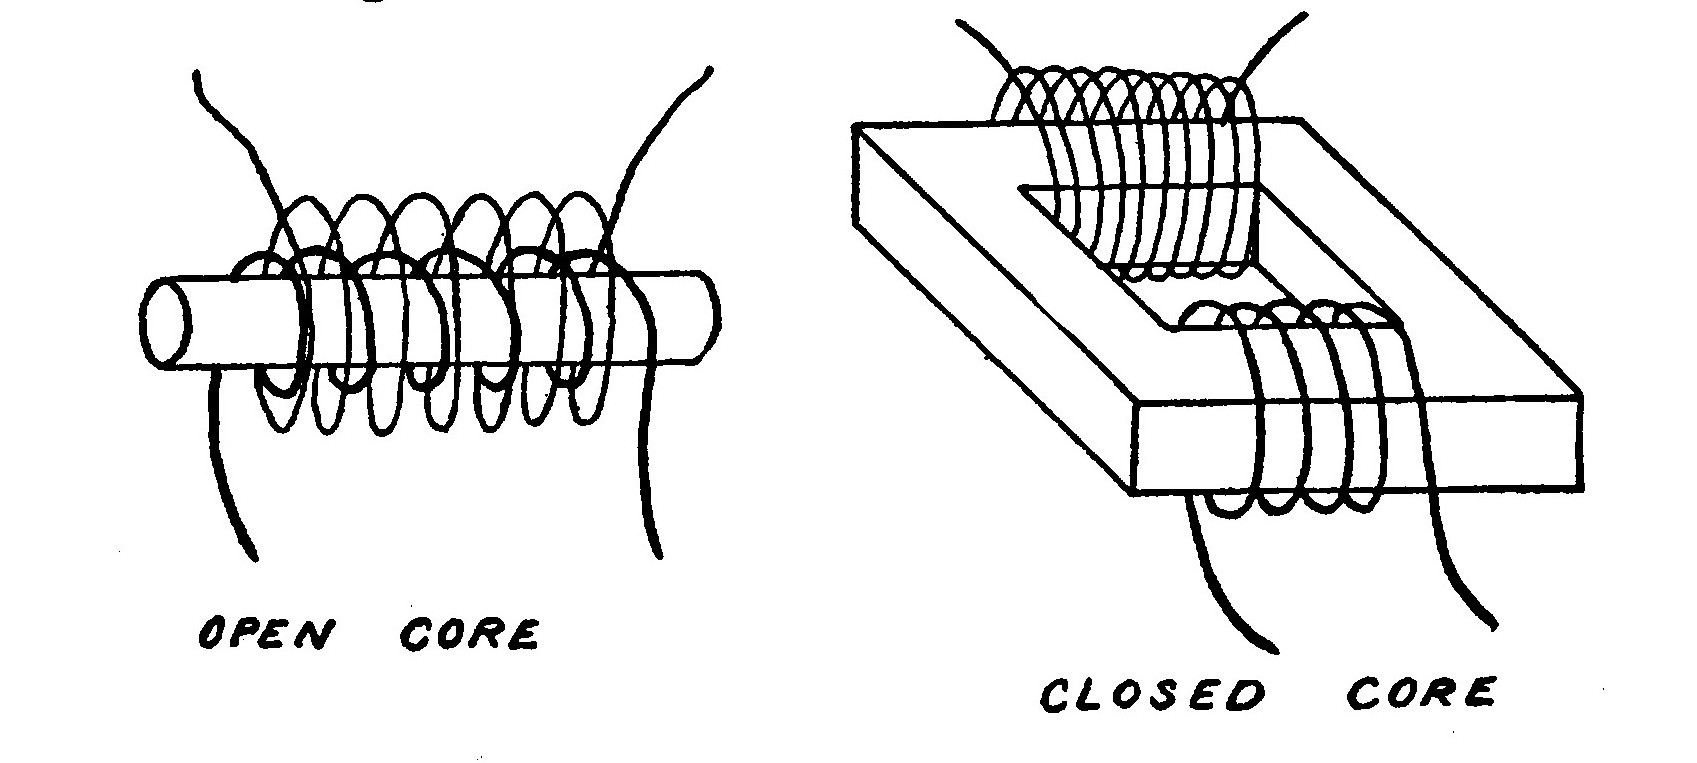 FIG. 23. Open and Closed Core Transformers.